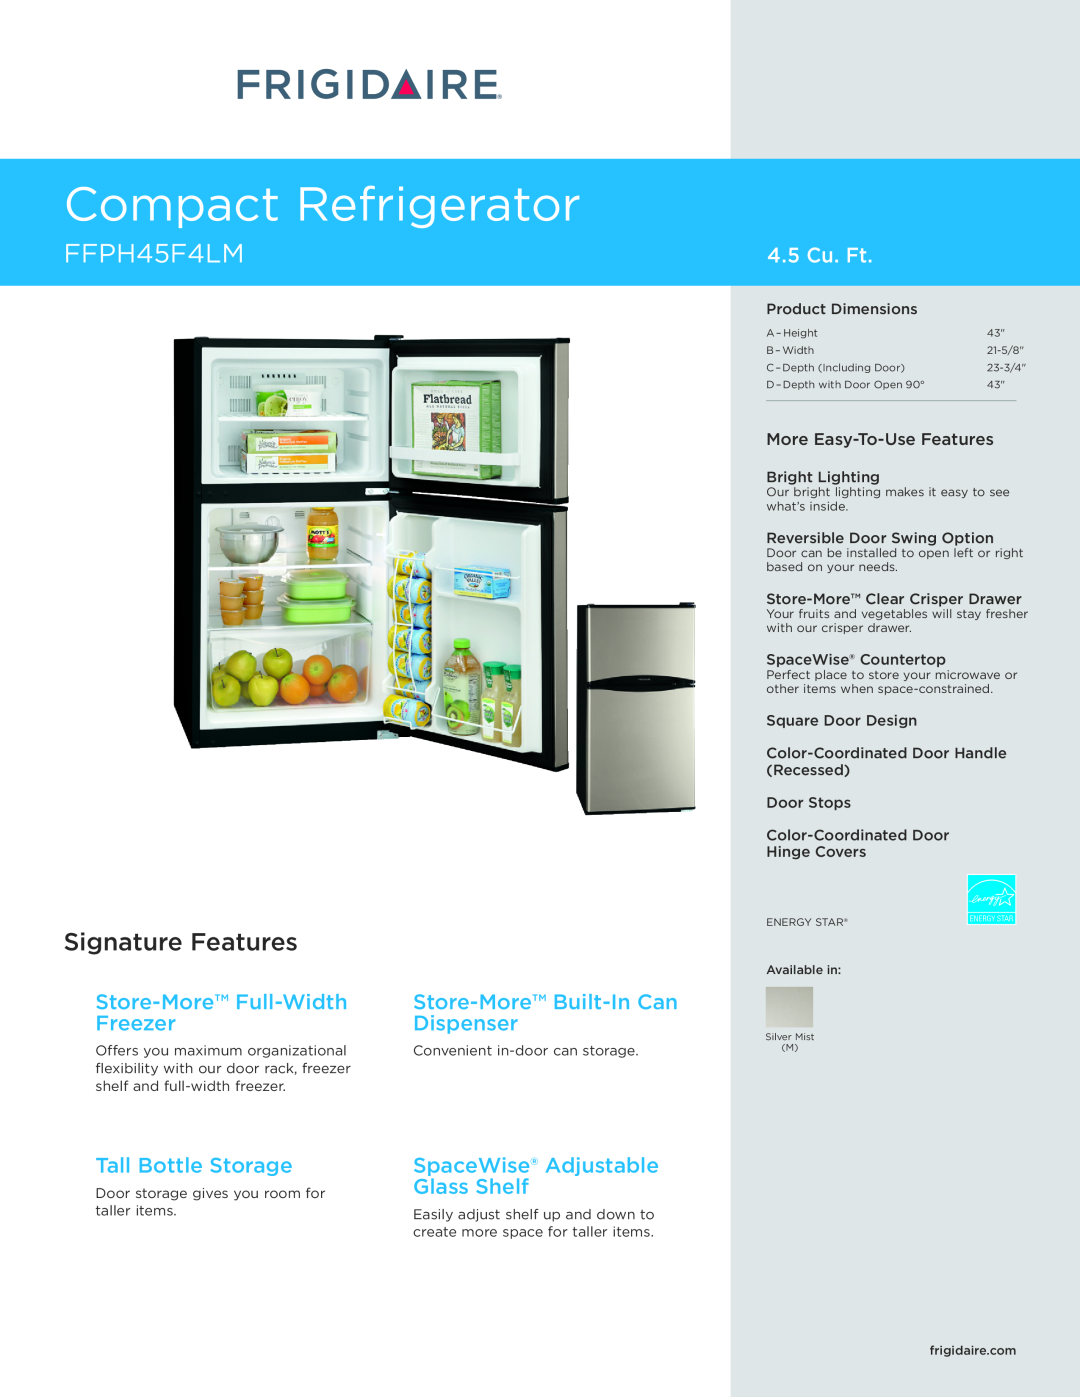 Frigidaire FFPH45F4LM dimensions Compact Refrigerator, FFPH45F4L M, Signature Features, 4.5 Cu. Ft, SpaceWise Countertop 